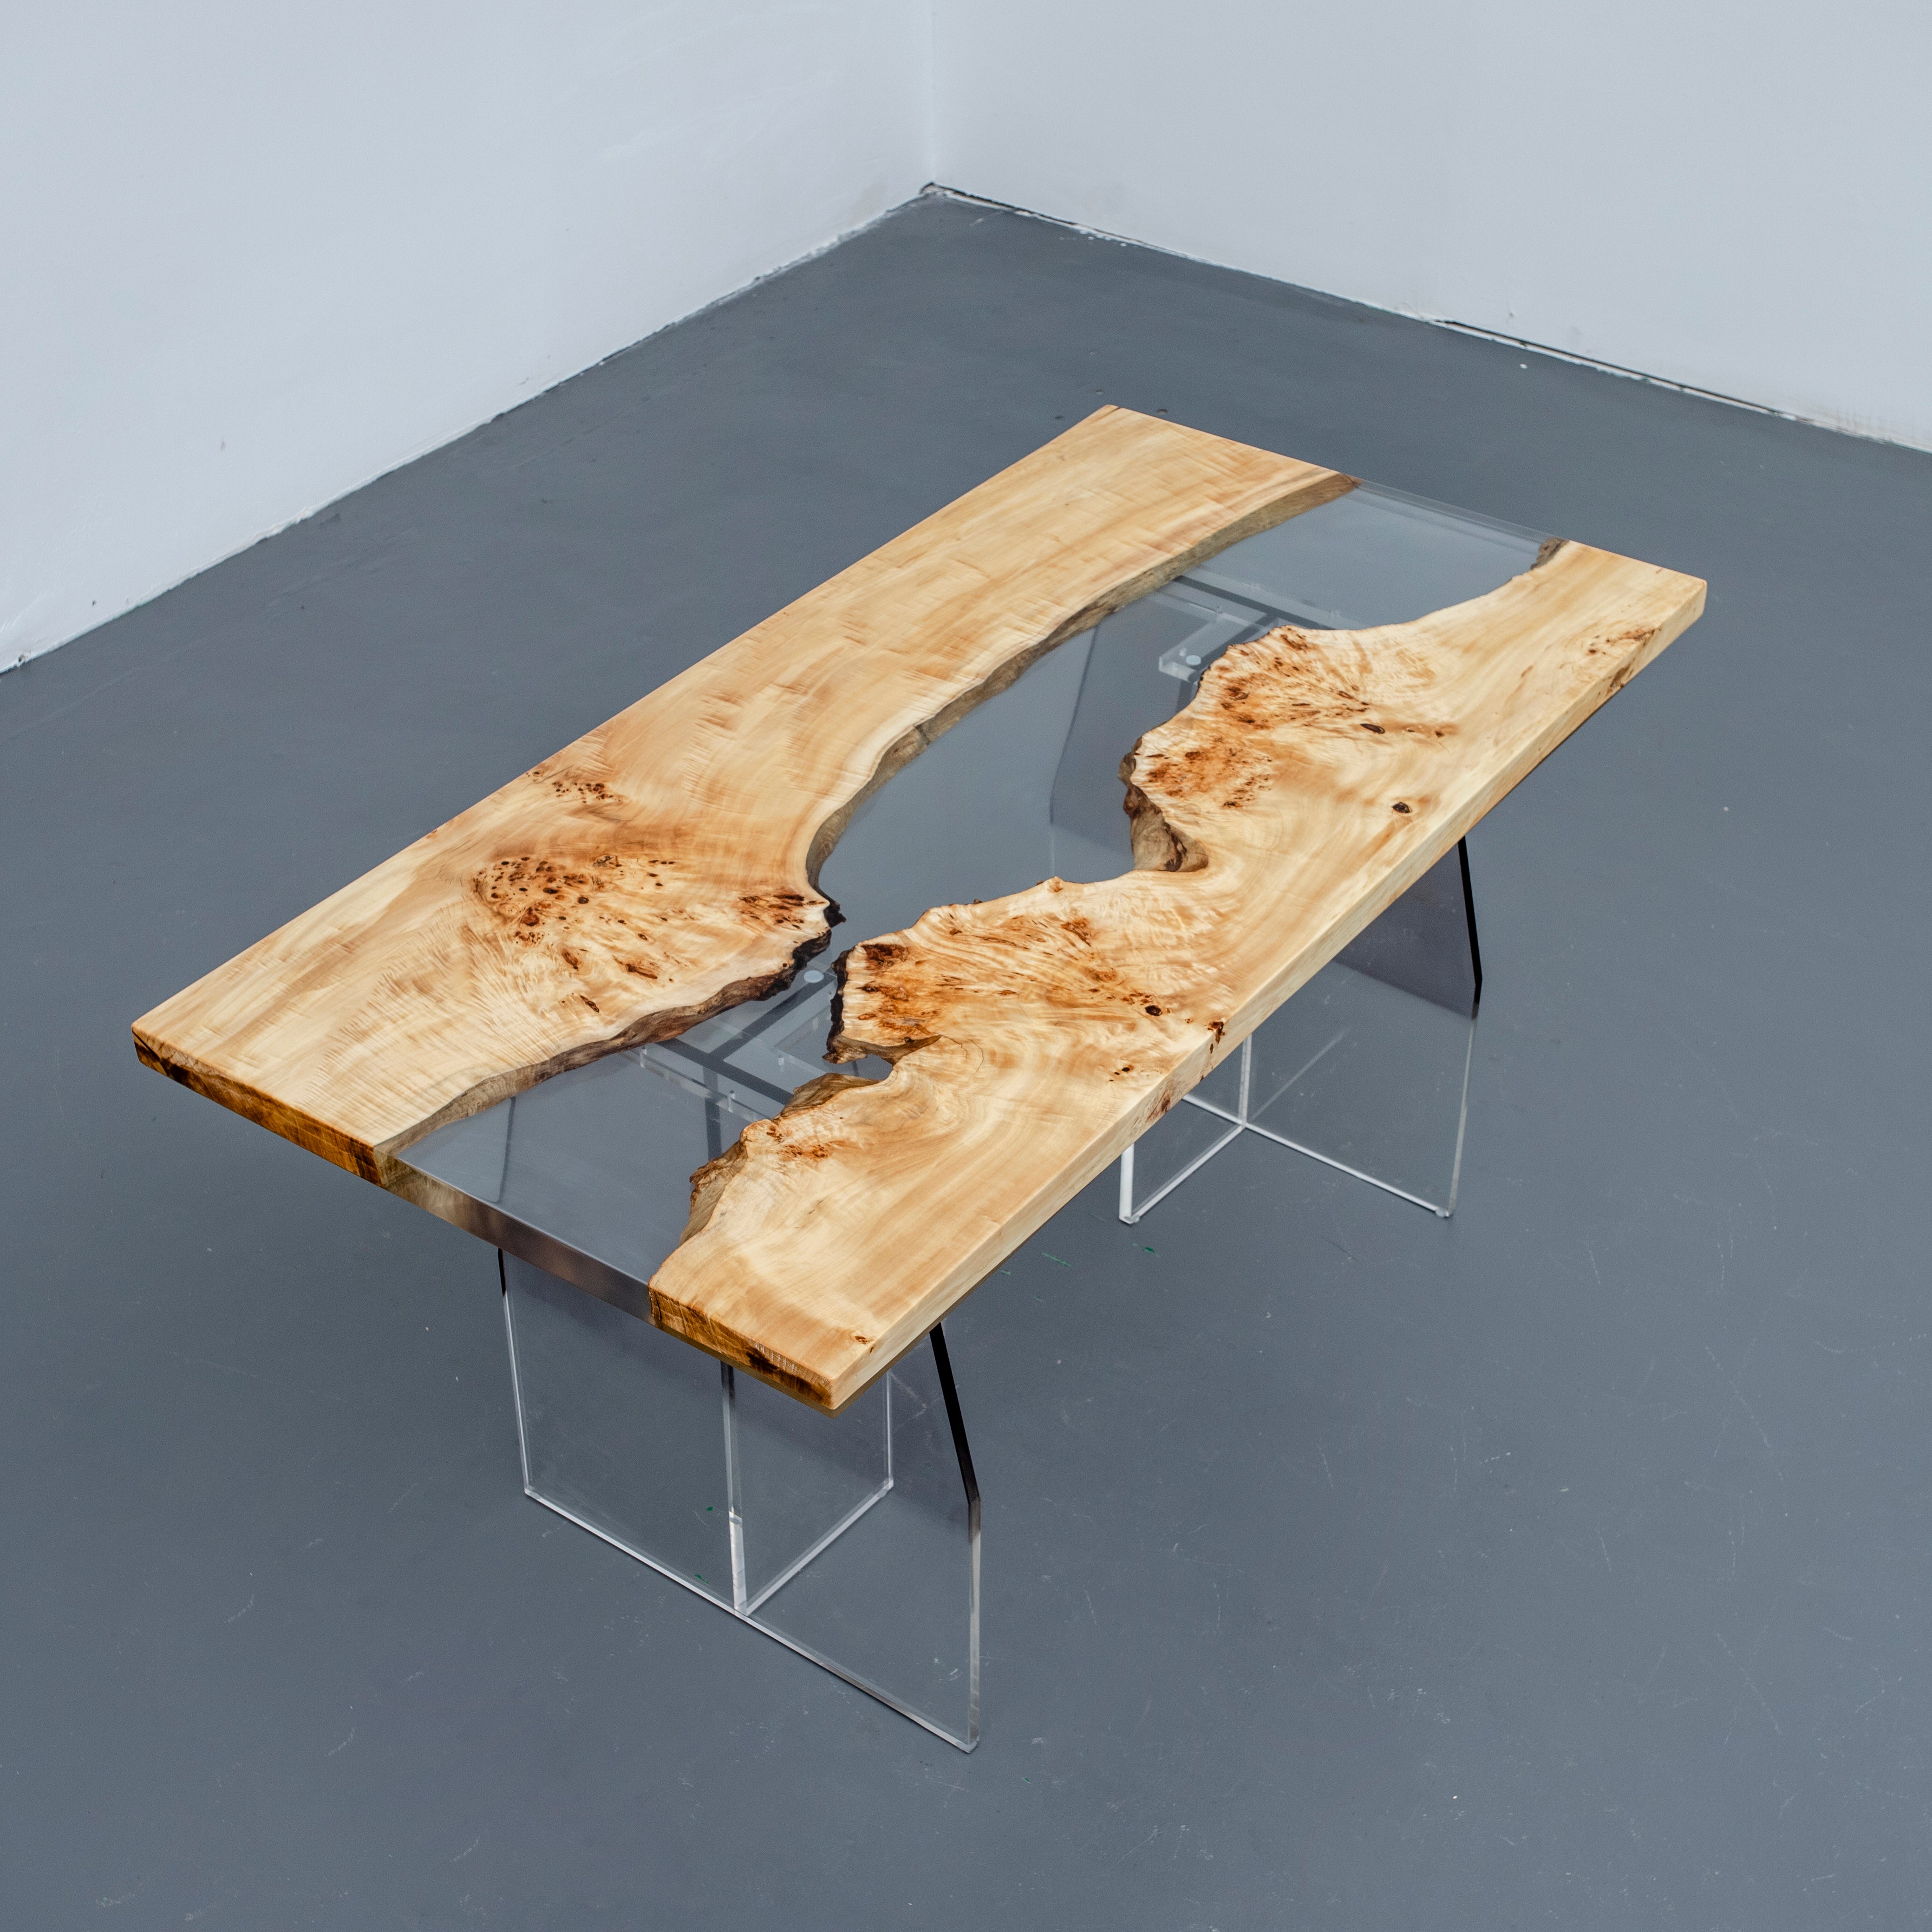 Epoxy Resin Fir Table Top, Epoxy Resin Live Edge Table, Epoxy Resin River Tables